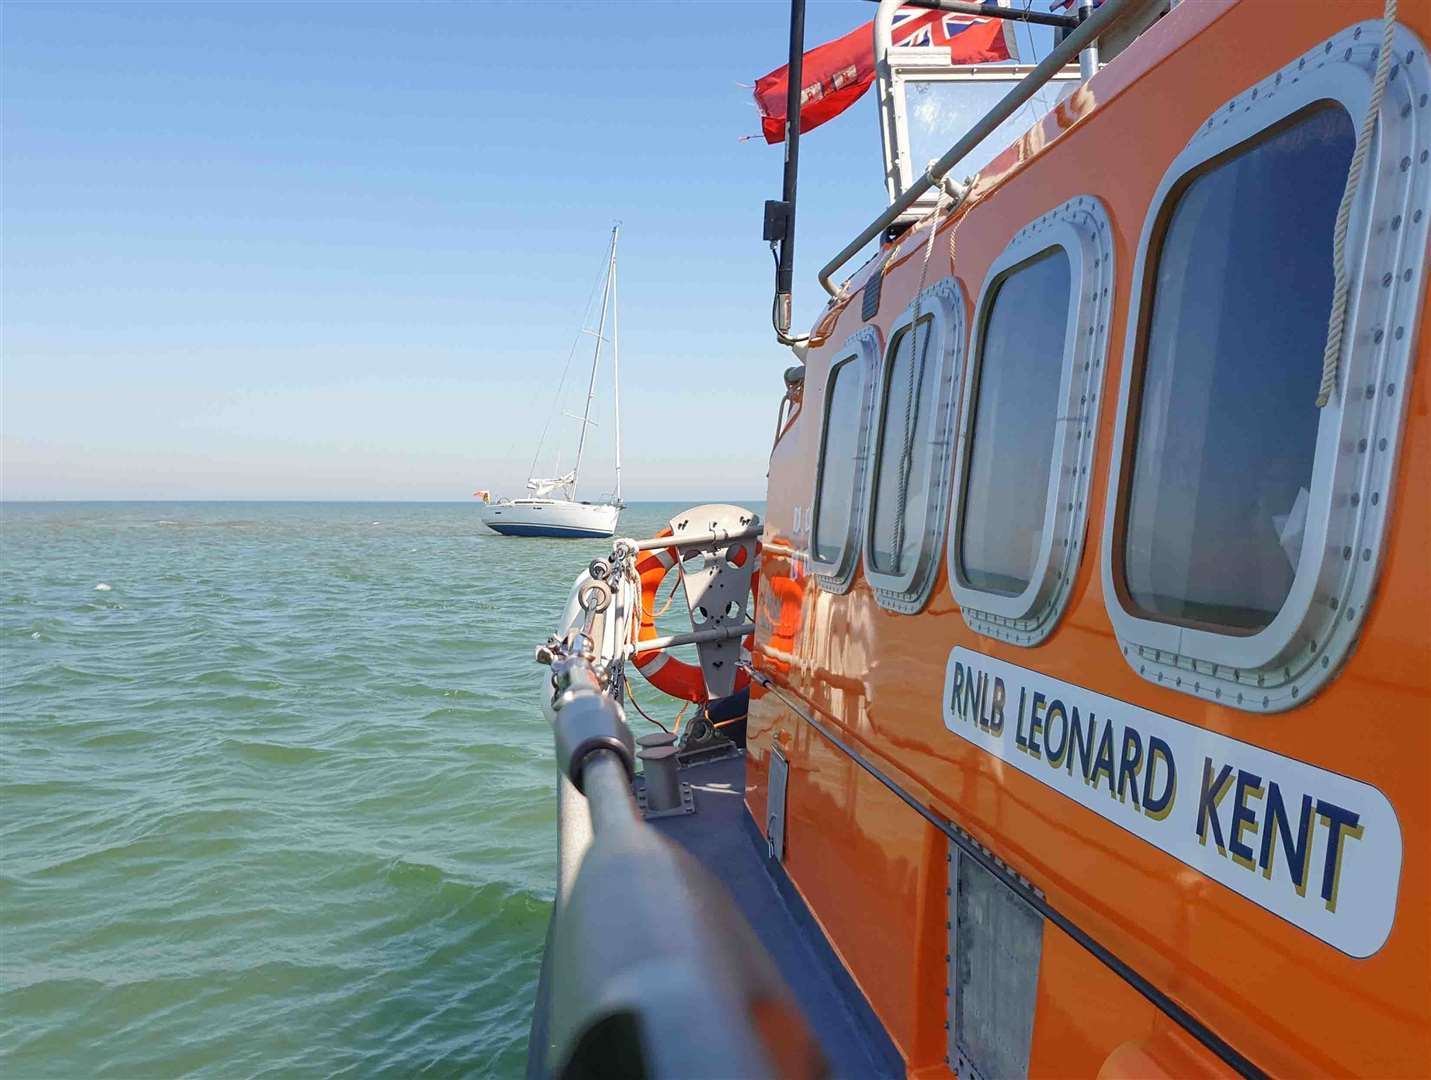 The stranded yacht was rescued by crews from Margate lifeboat. Picture: RNLI Margate (14238526)